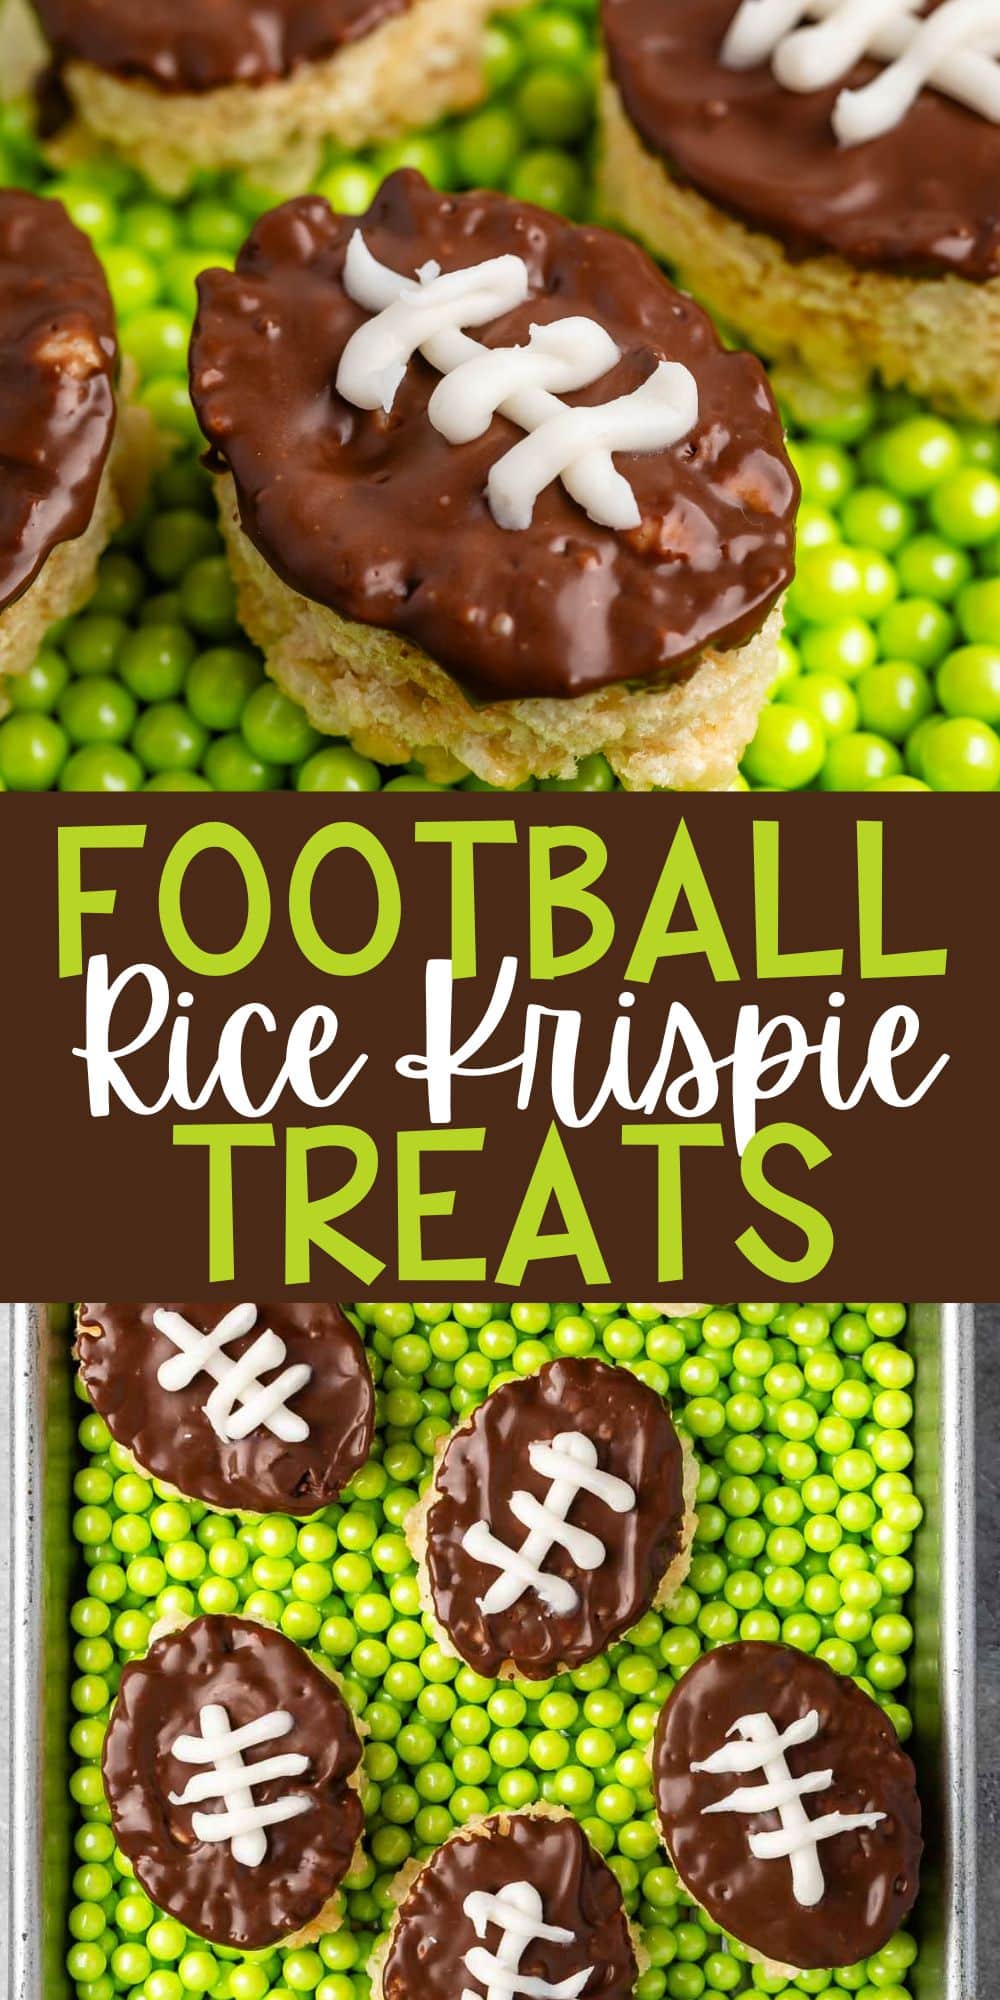 two photos mini Rice Krispie treats in the shape on footballs with brown and white frosting on top to resembles a football on a field with words on the image.